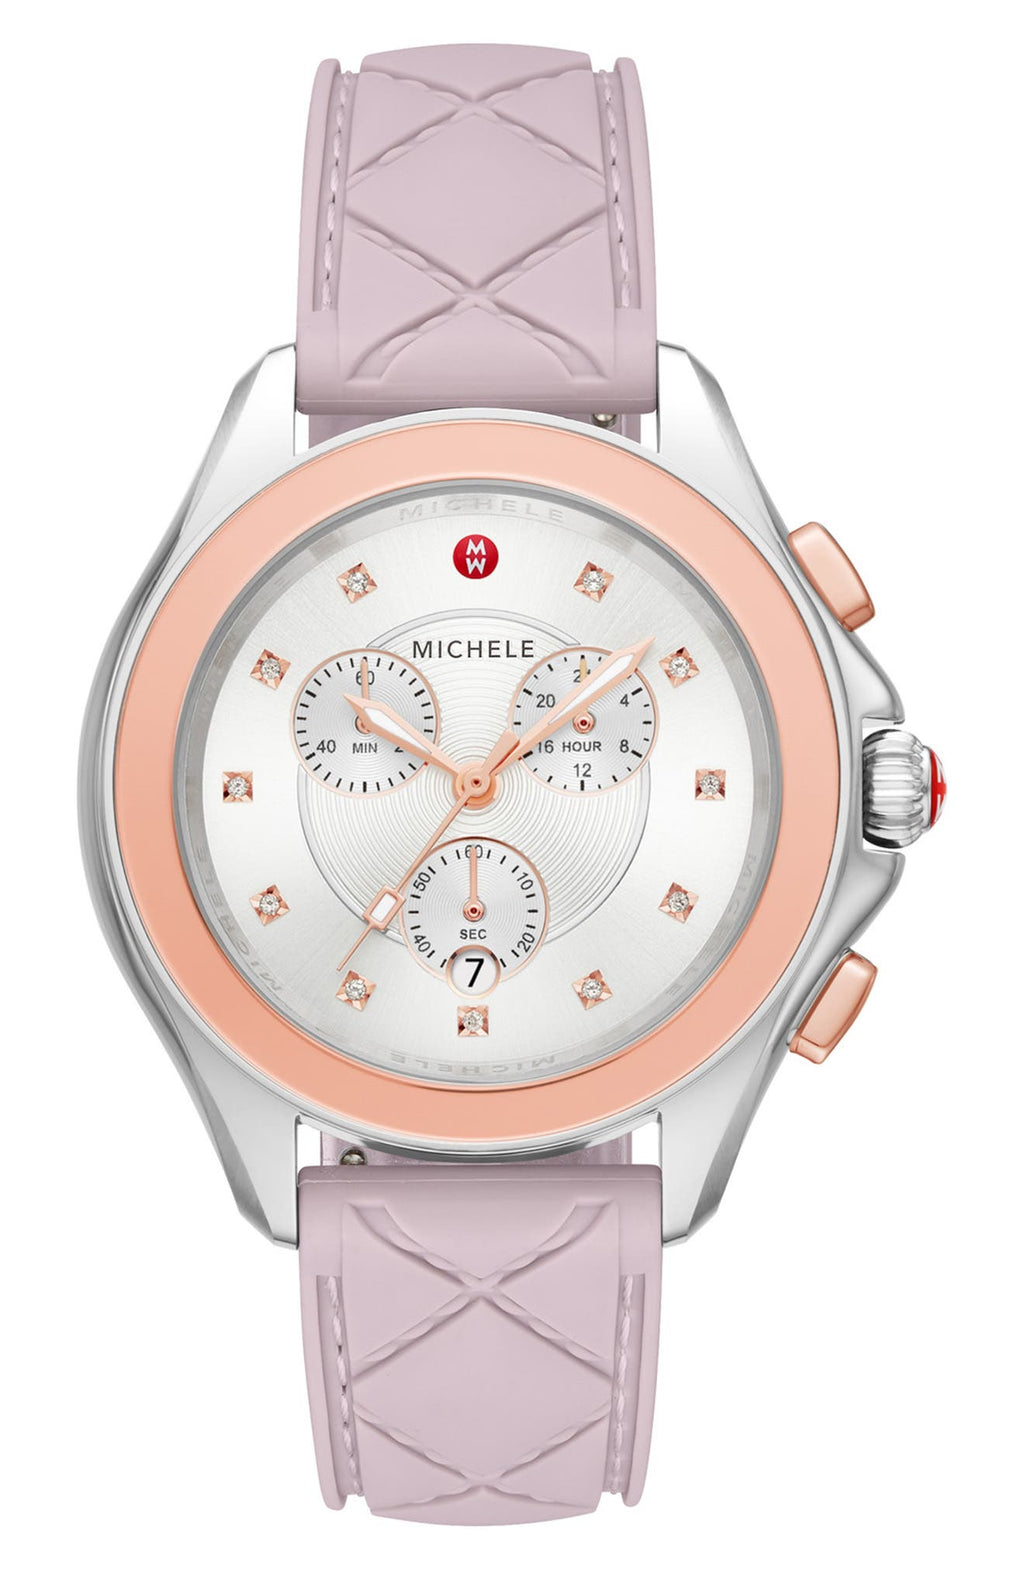 MICHELE Women's Cape Chronograph Lilac Silicone Watch, 38mm, Main, color, LILAC